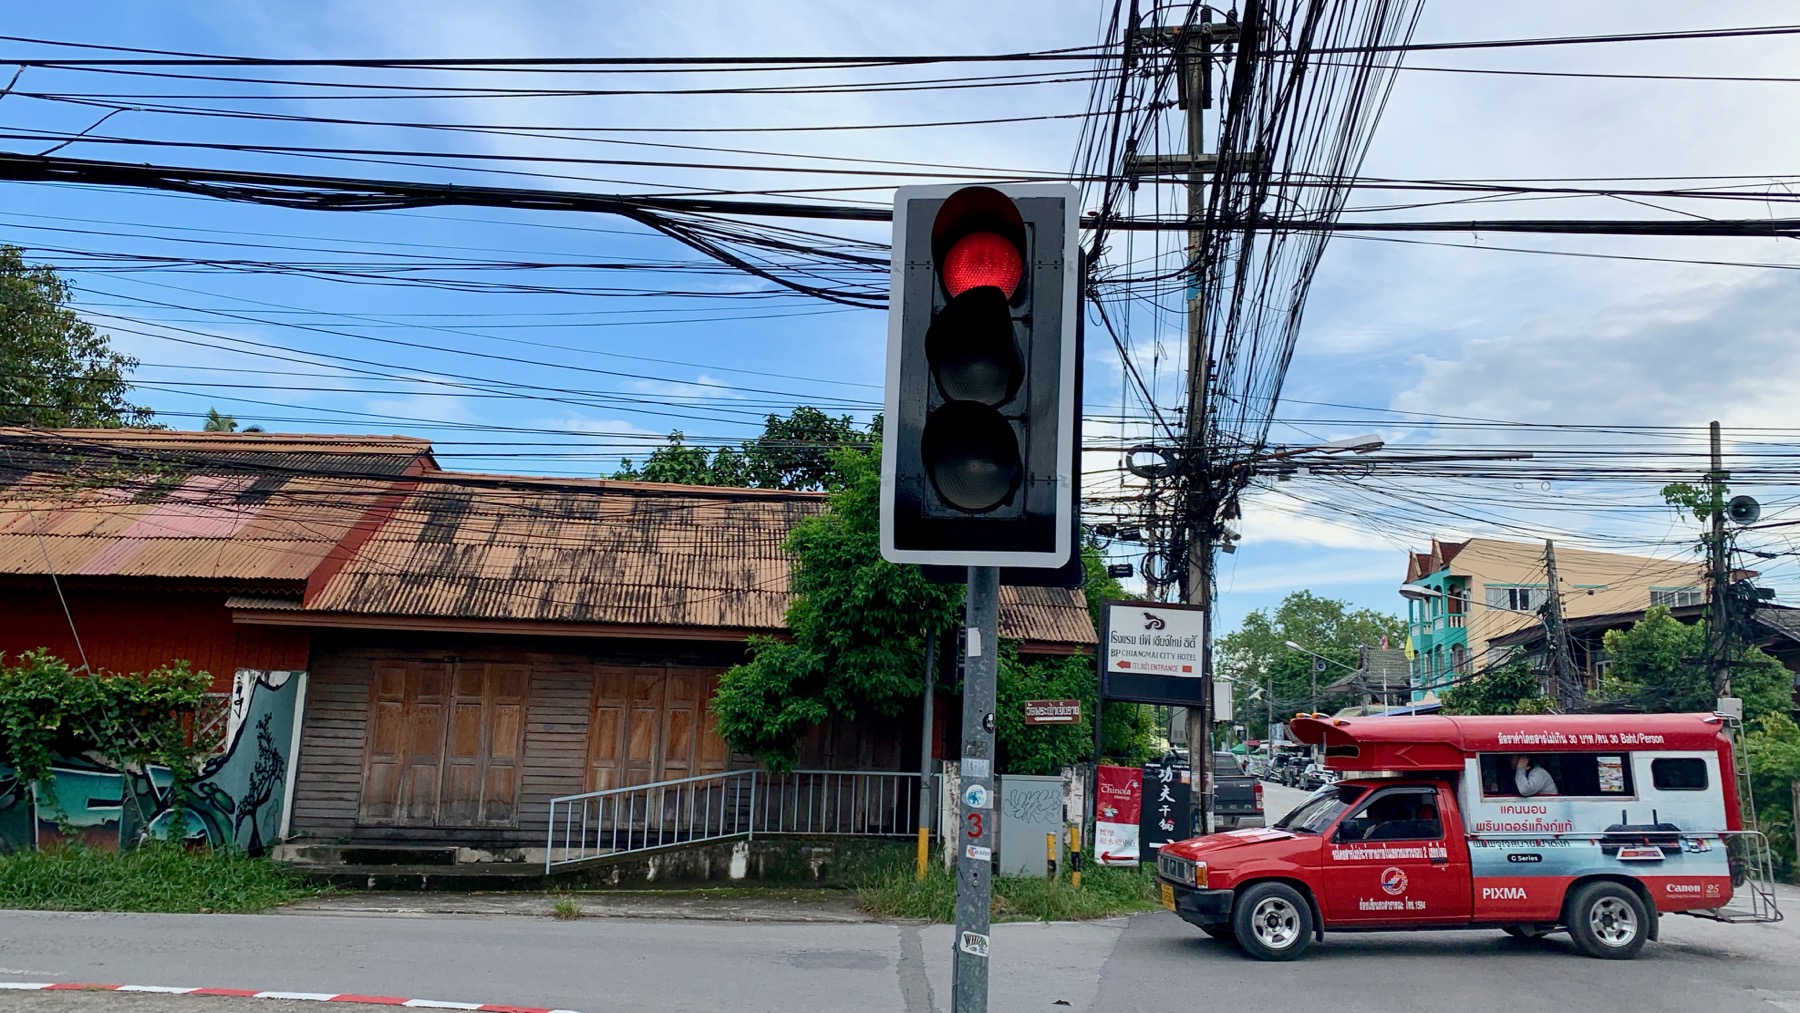 A traffic light at the corner of Thanon Ratmakka and Soi Sam Lan in Chiang Mai's Old City, with a passing Songthaew, the red passenger trucks that form the core of the city's public transport.